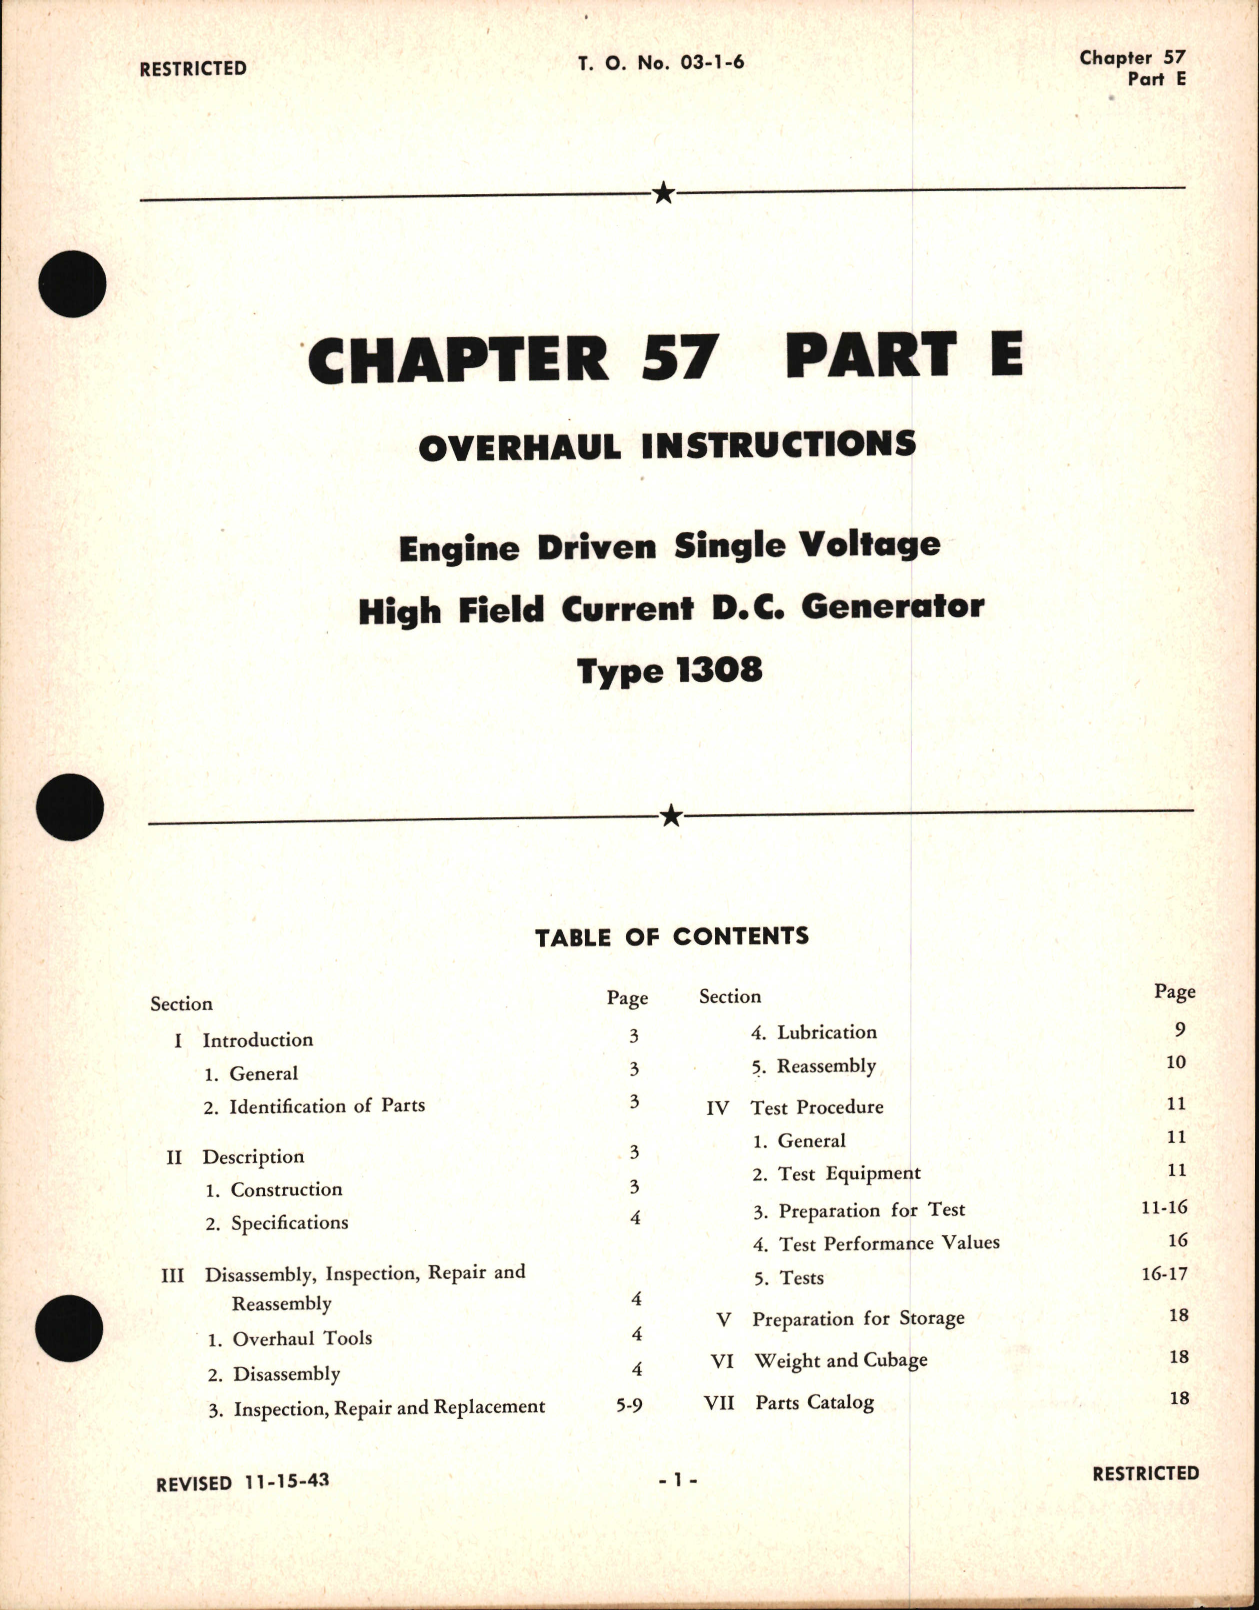 Sample page 1 from AirCorps Library document: Overhaul Instructions for Engine Driven Single Voltage High Field Current D.C. Generator, Ch 57 Part E